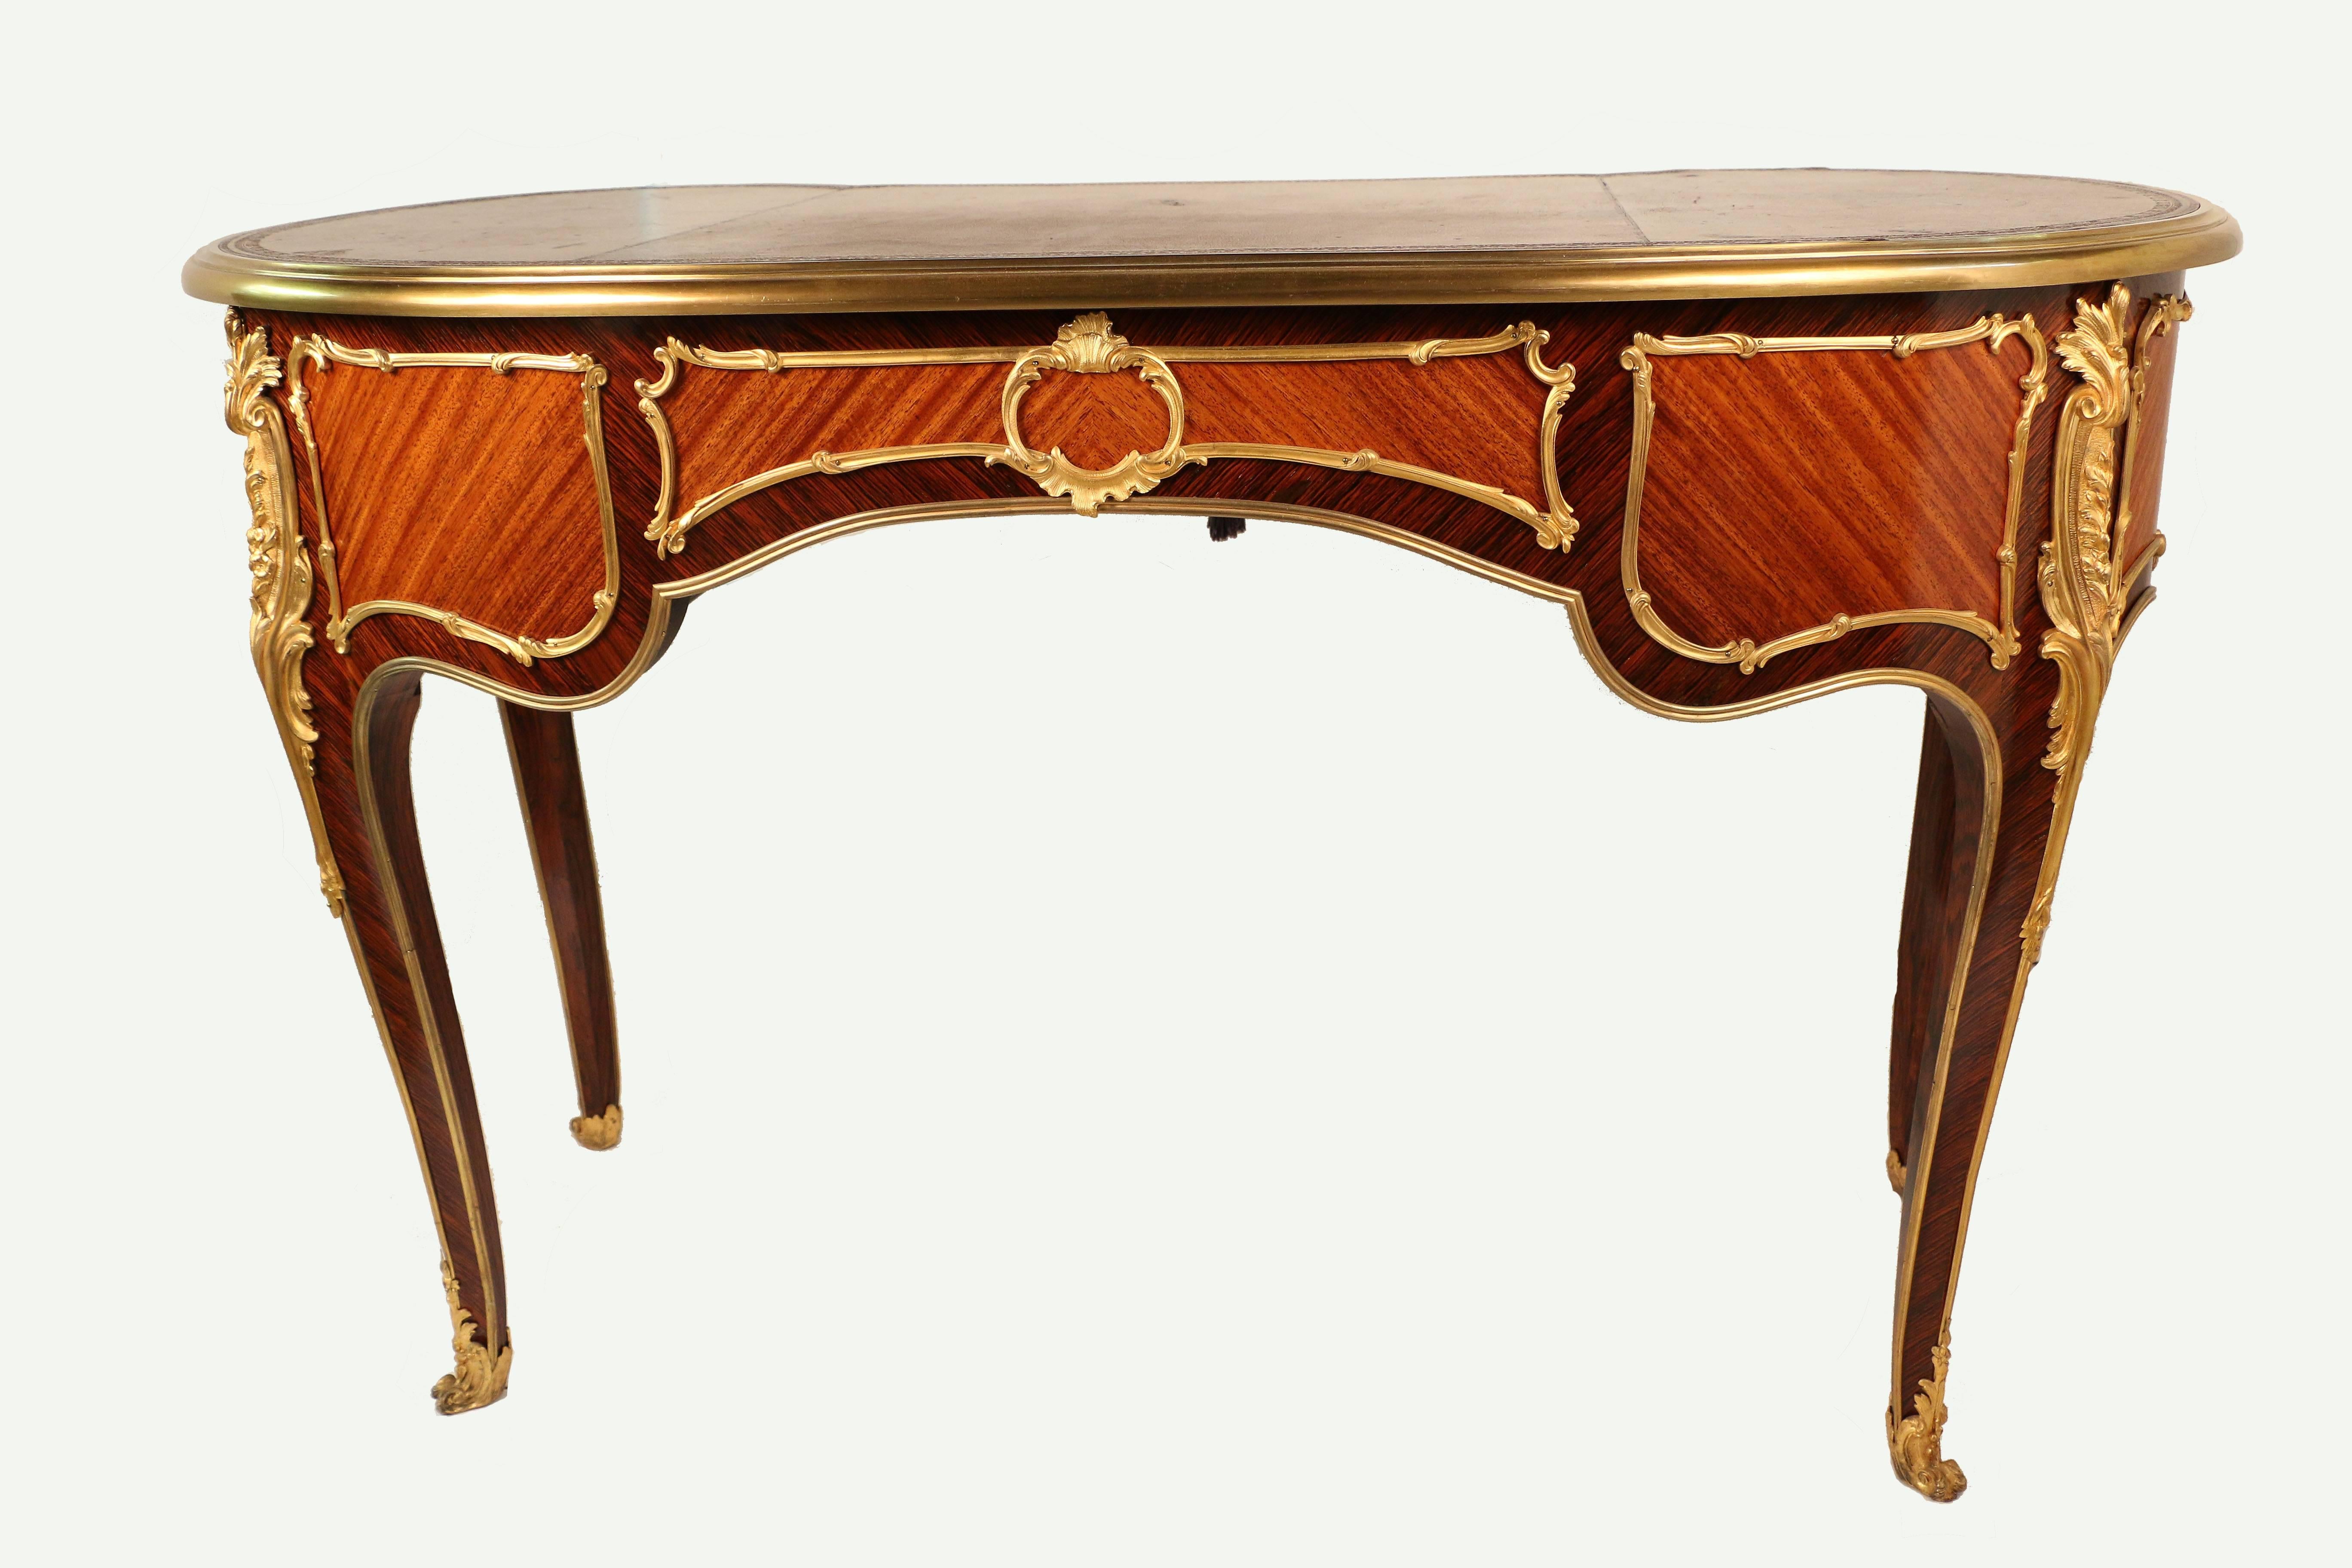 A very fine kingwood kidney- shaped desk (bureau a rognon) with original tooled leather surface, crisply mounted in gilt bronze and on cabriole legs .
signed in the gilt bronze surround T.W. Muller.

T W Muller was a Viennese cabinet maker who